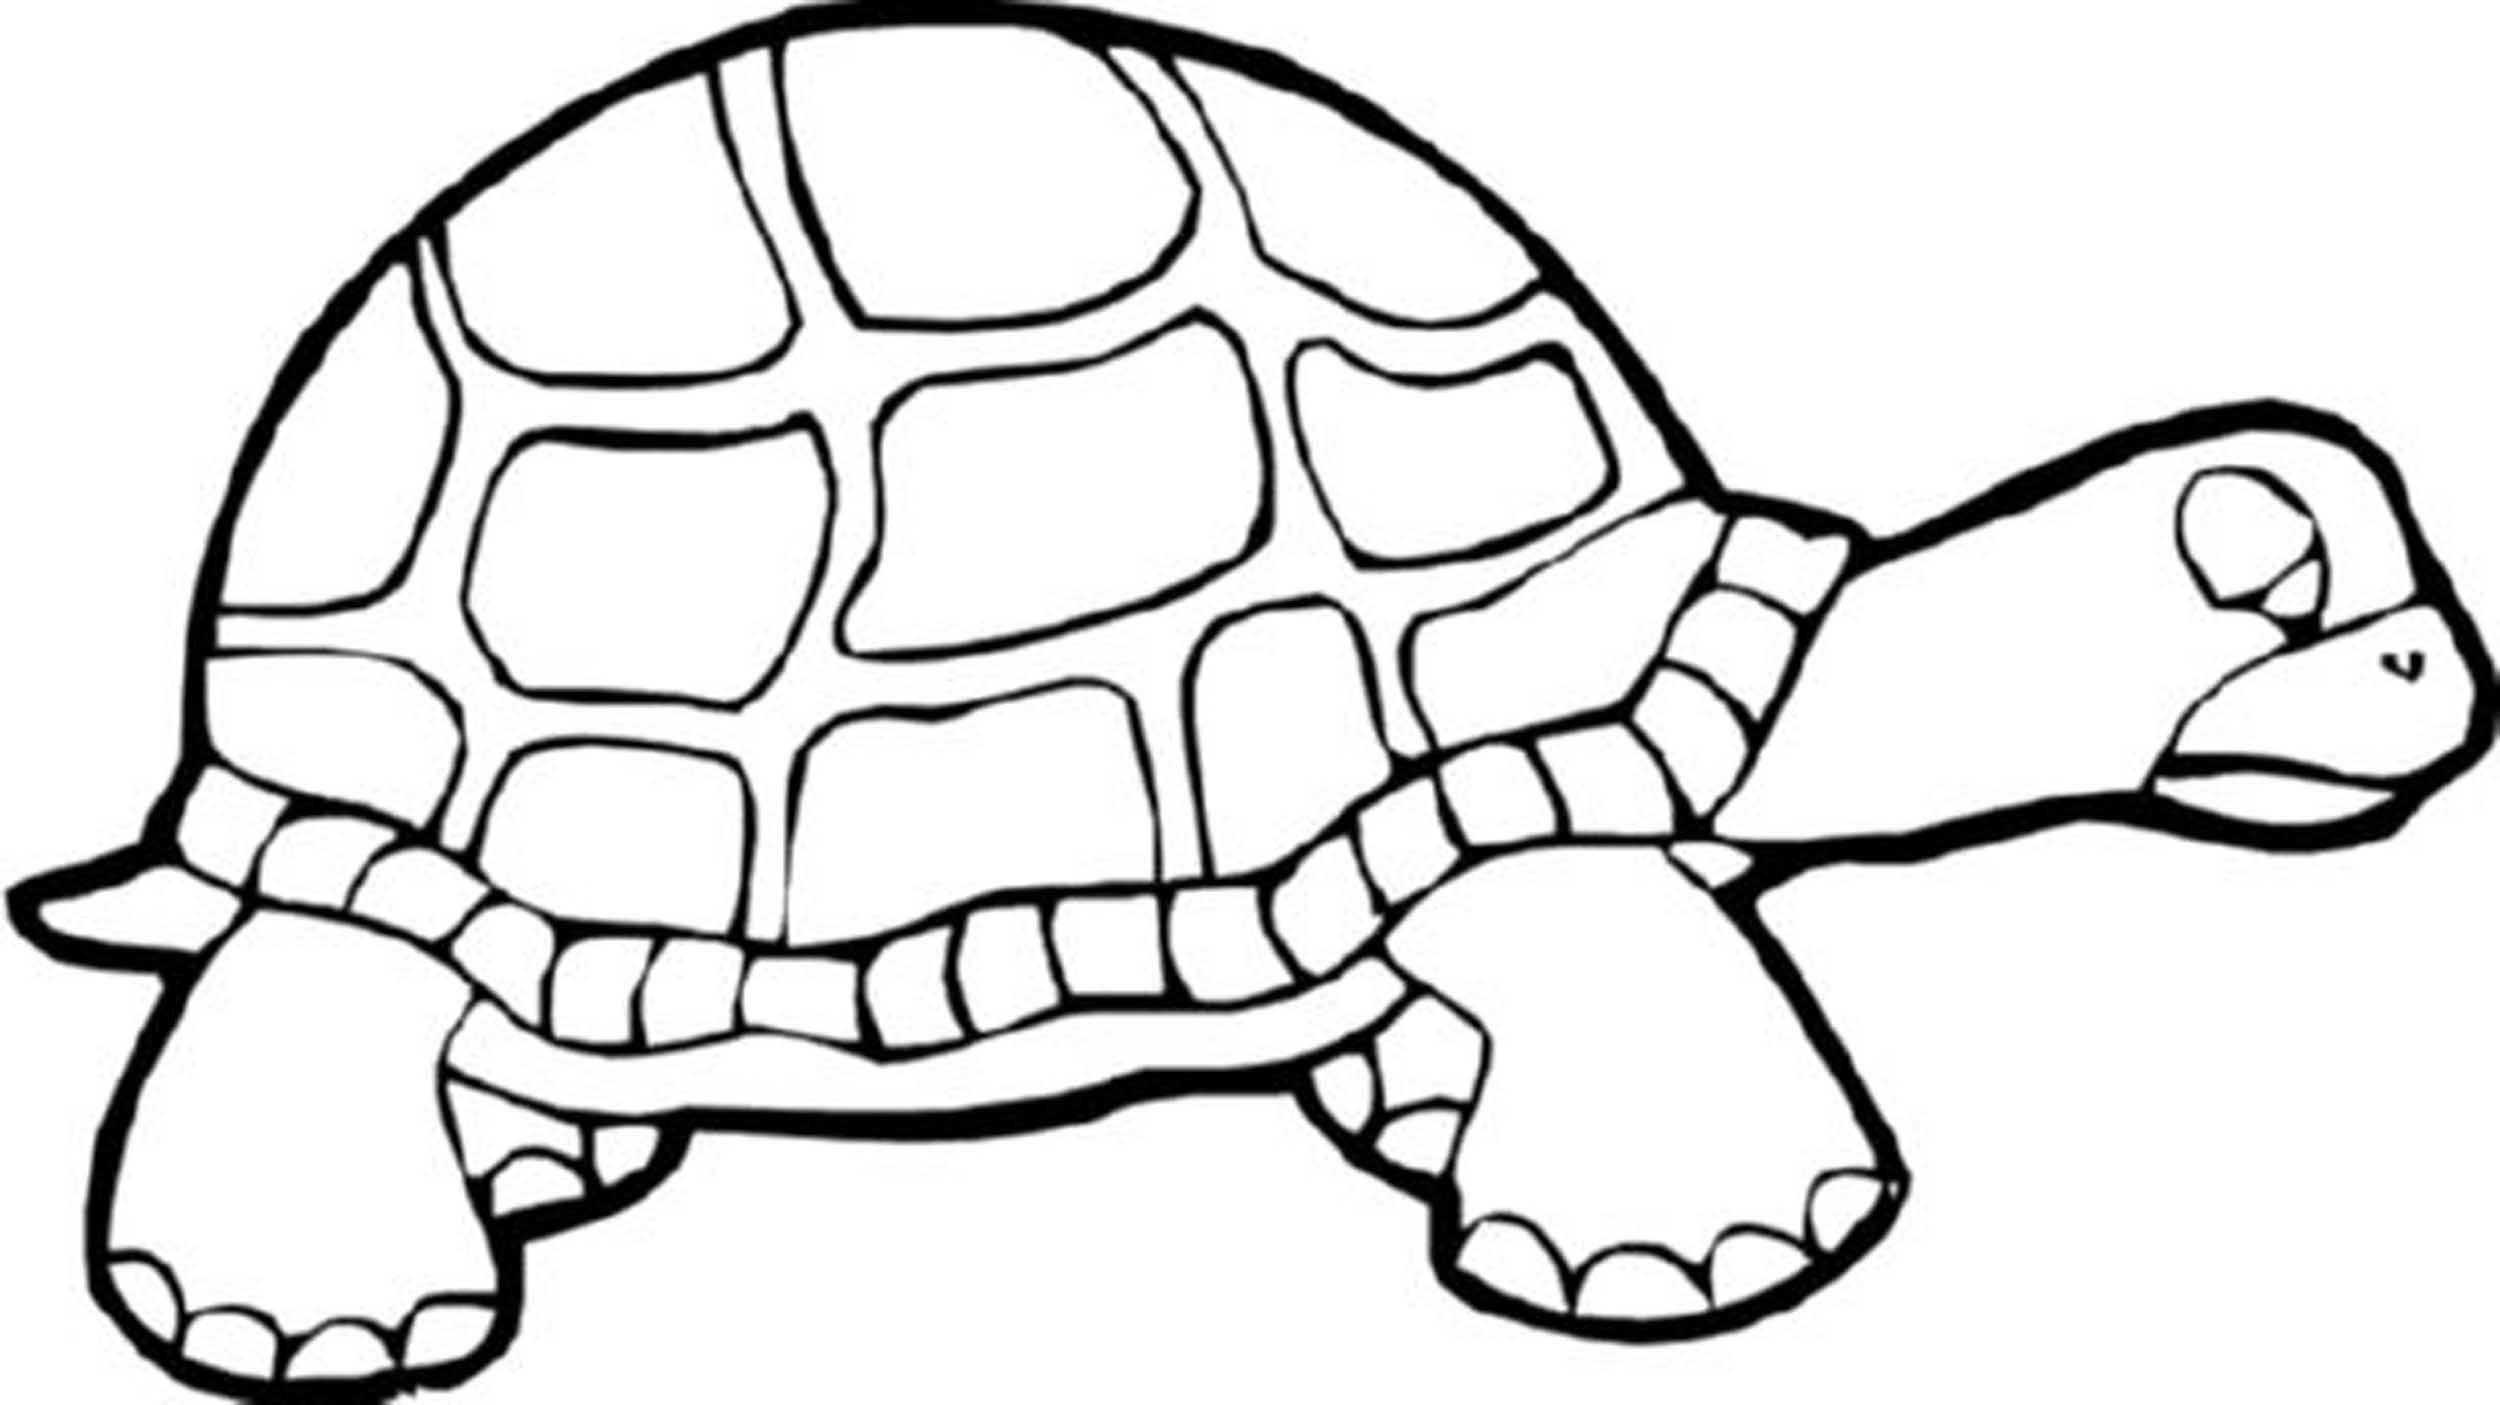 Print Download Turtle Coloring Pages as the